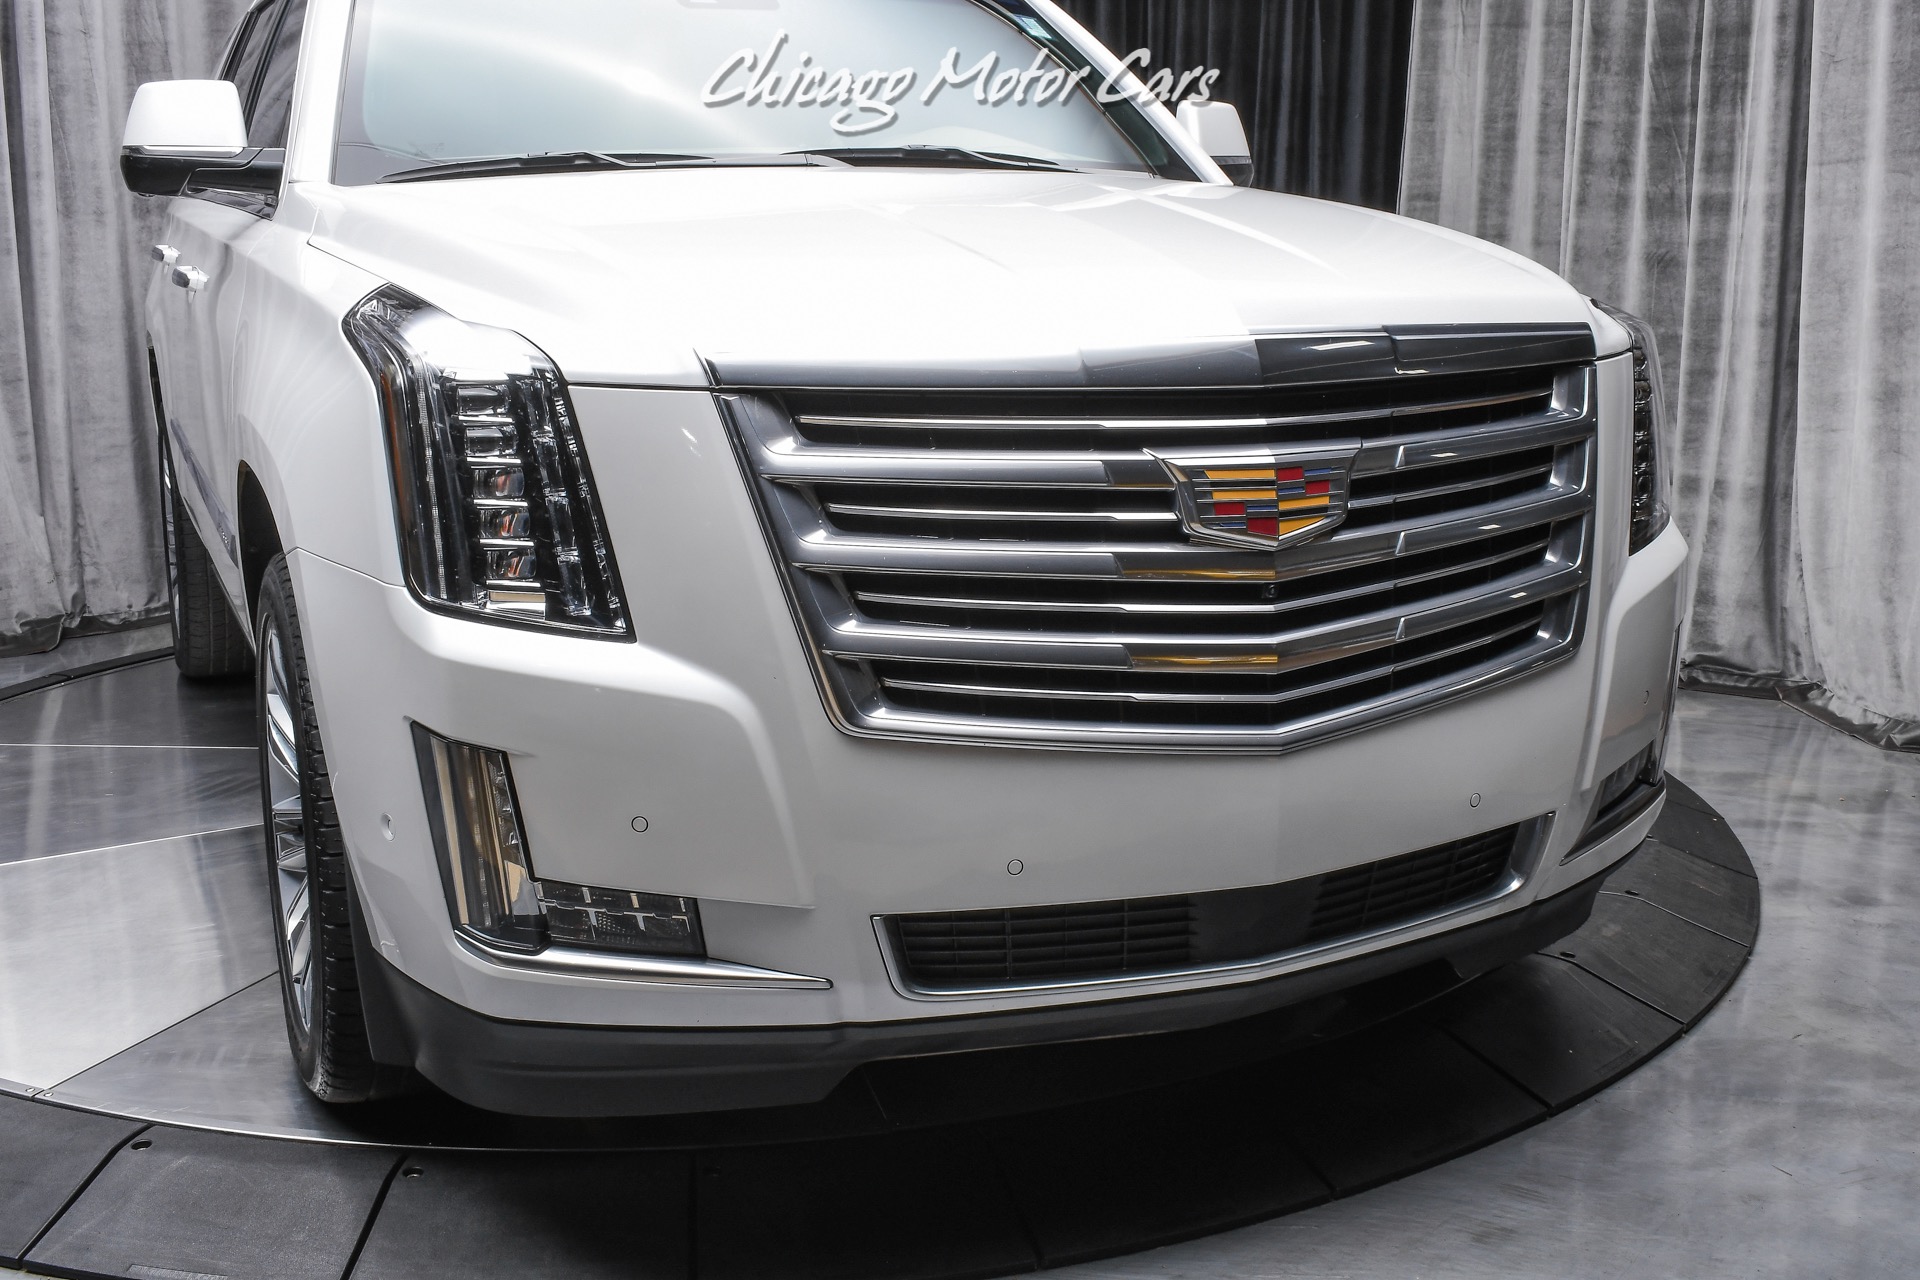 Used-2019-Cadillac-Escalade-Platinum-4WD-SUV-EXCELLENT-CONDITION-THROUGHOUT-HIGH-END-PLATINUM-MODEL